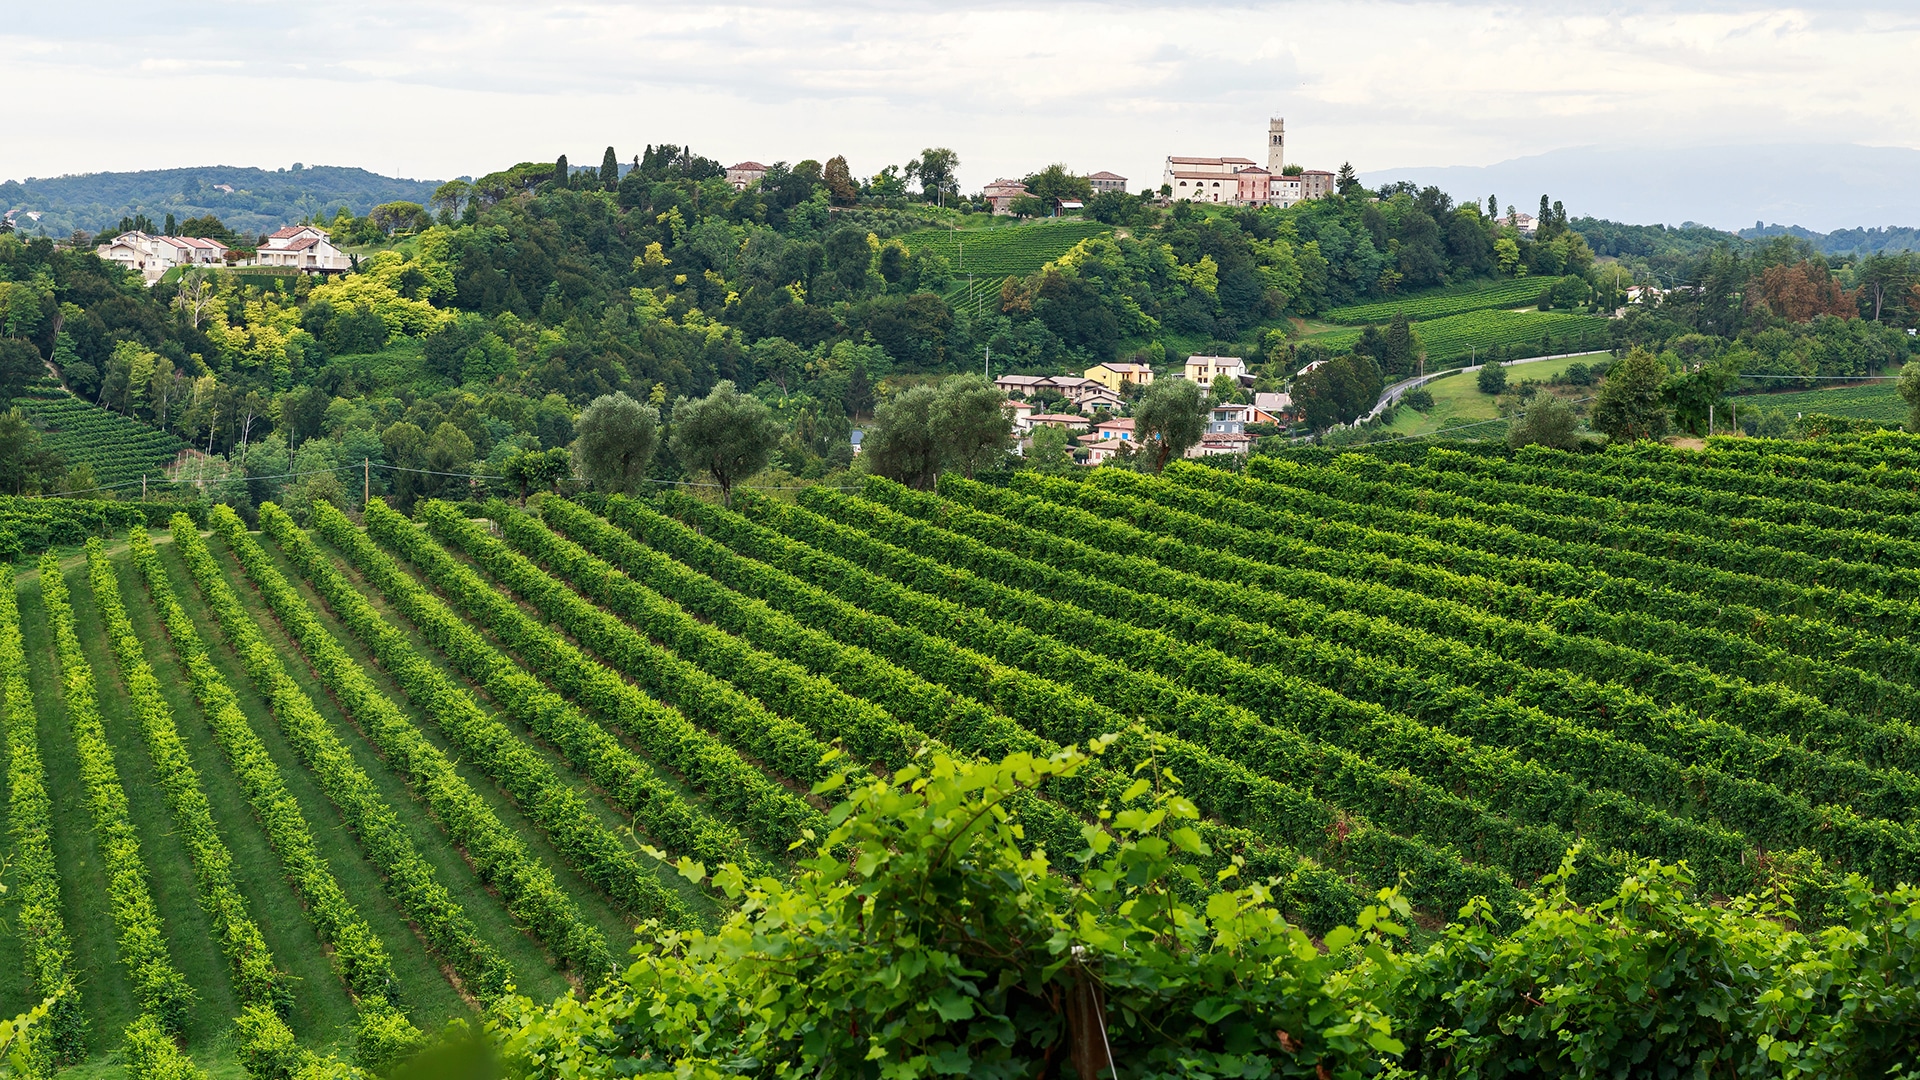 The vineyards of Treviso, Italy.